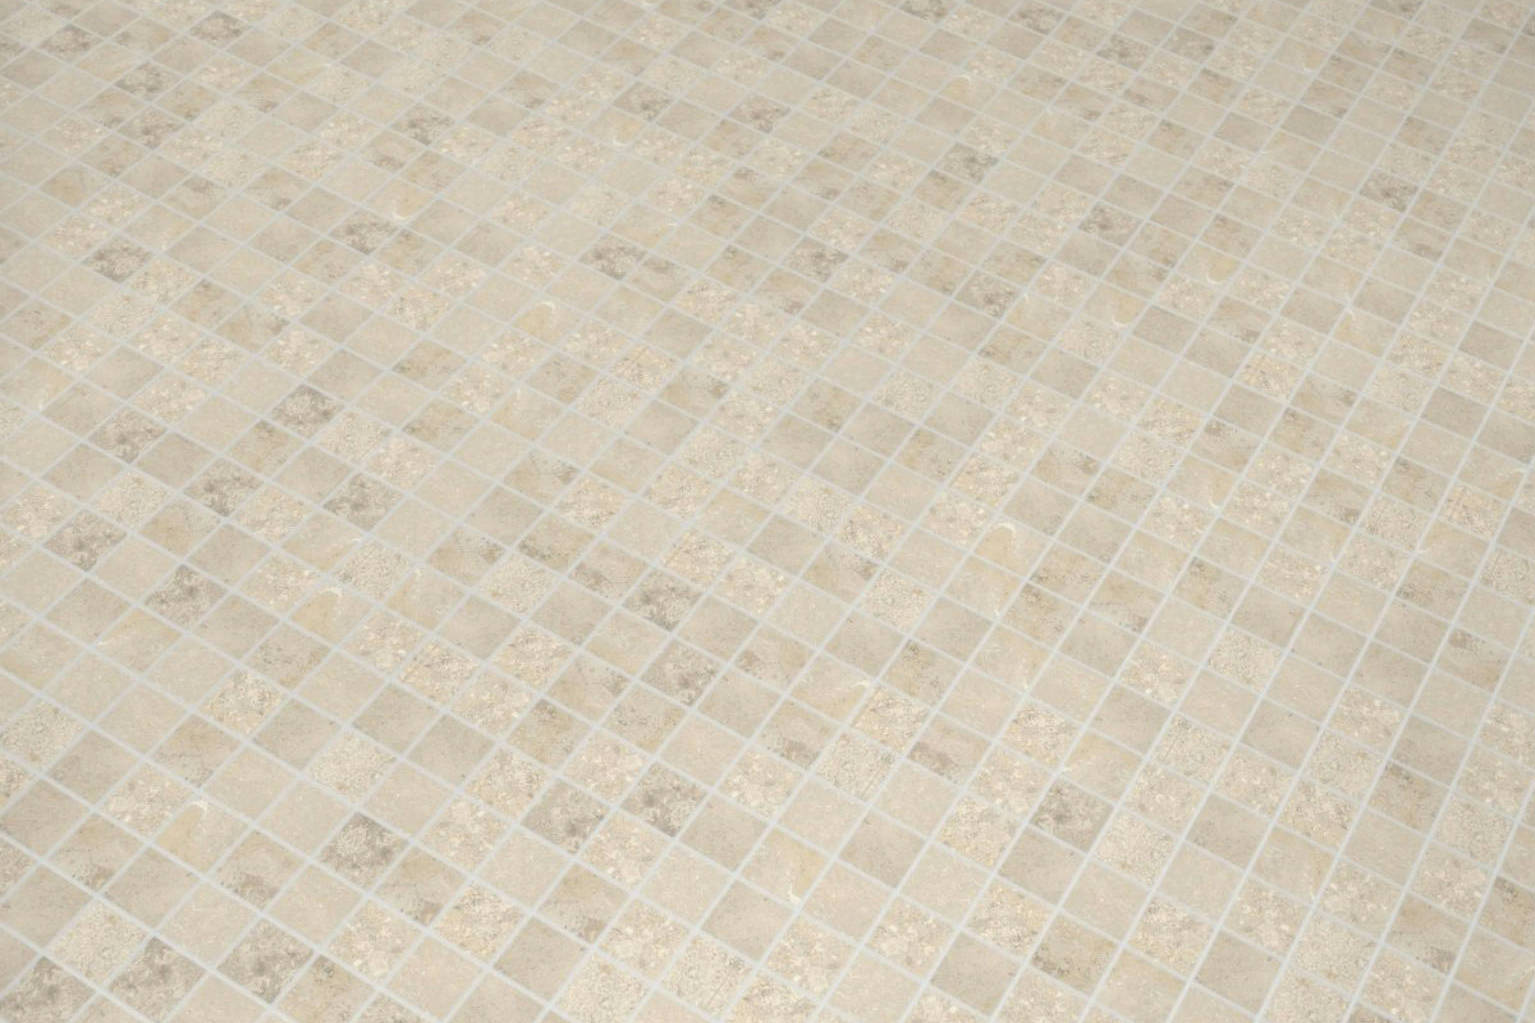 Elevation Dor Sand 2X2 Mosaic | In Home Stone